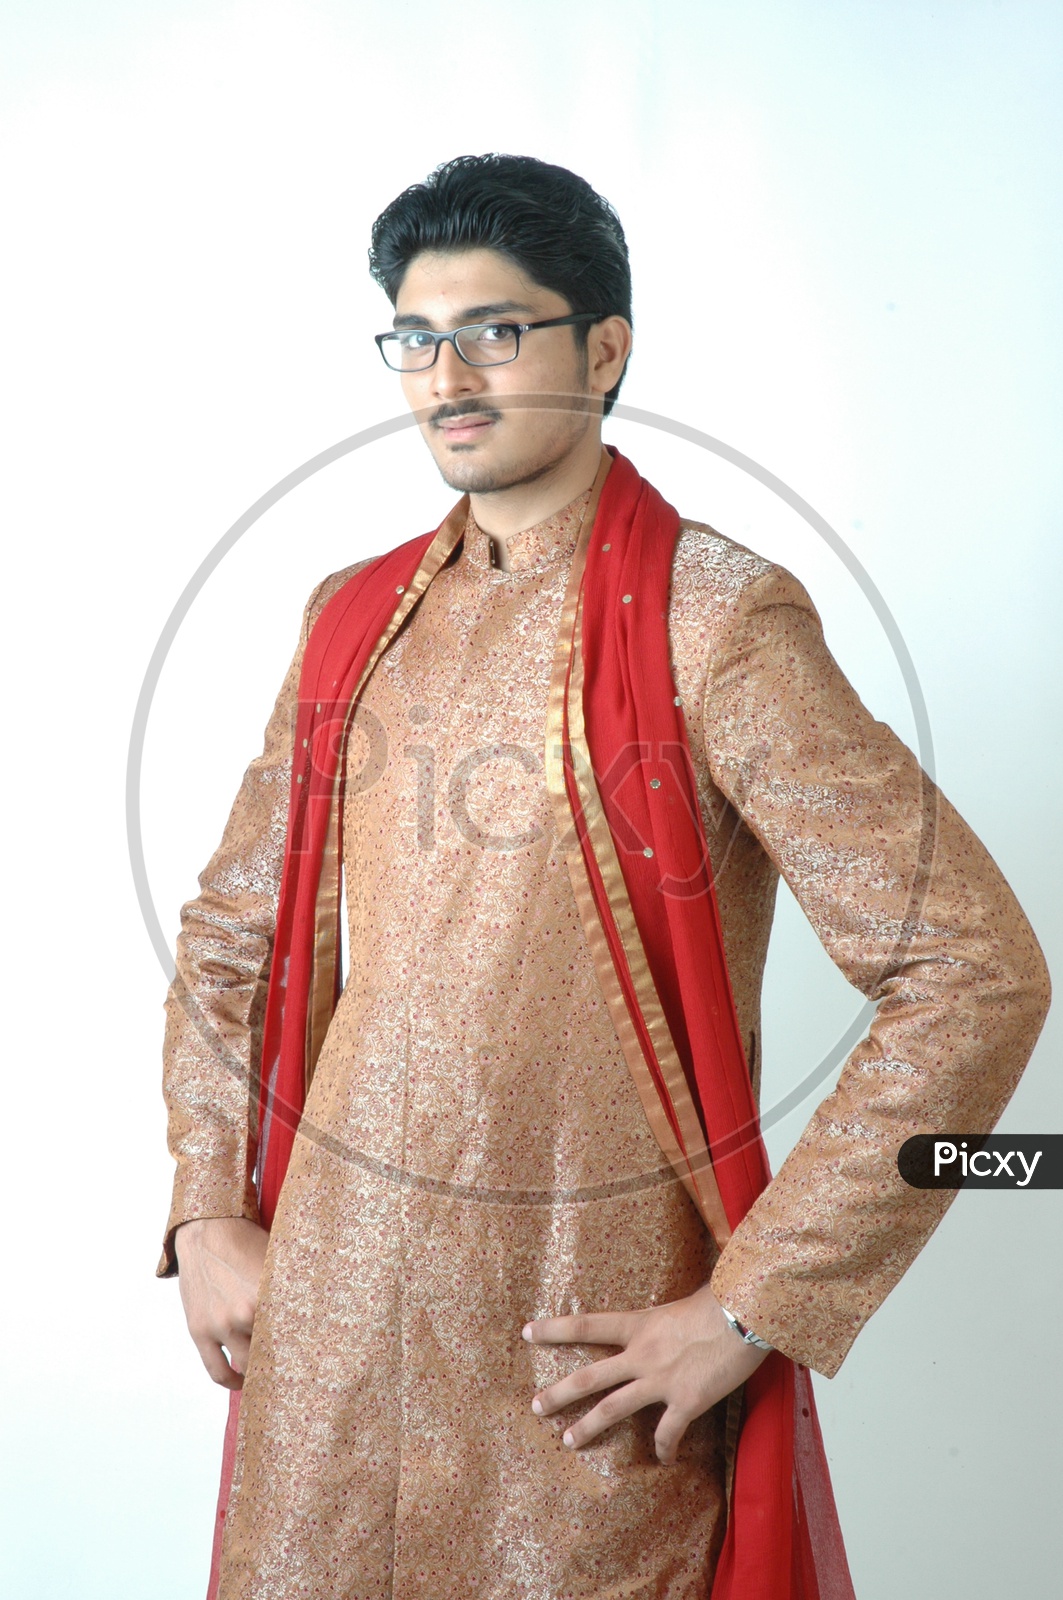 Indianwear tips for men: How to look good in ethnic wear this Diwali | GQ  India